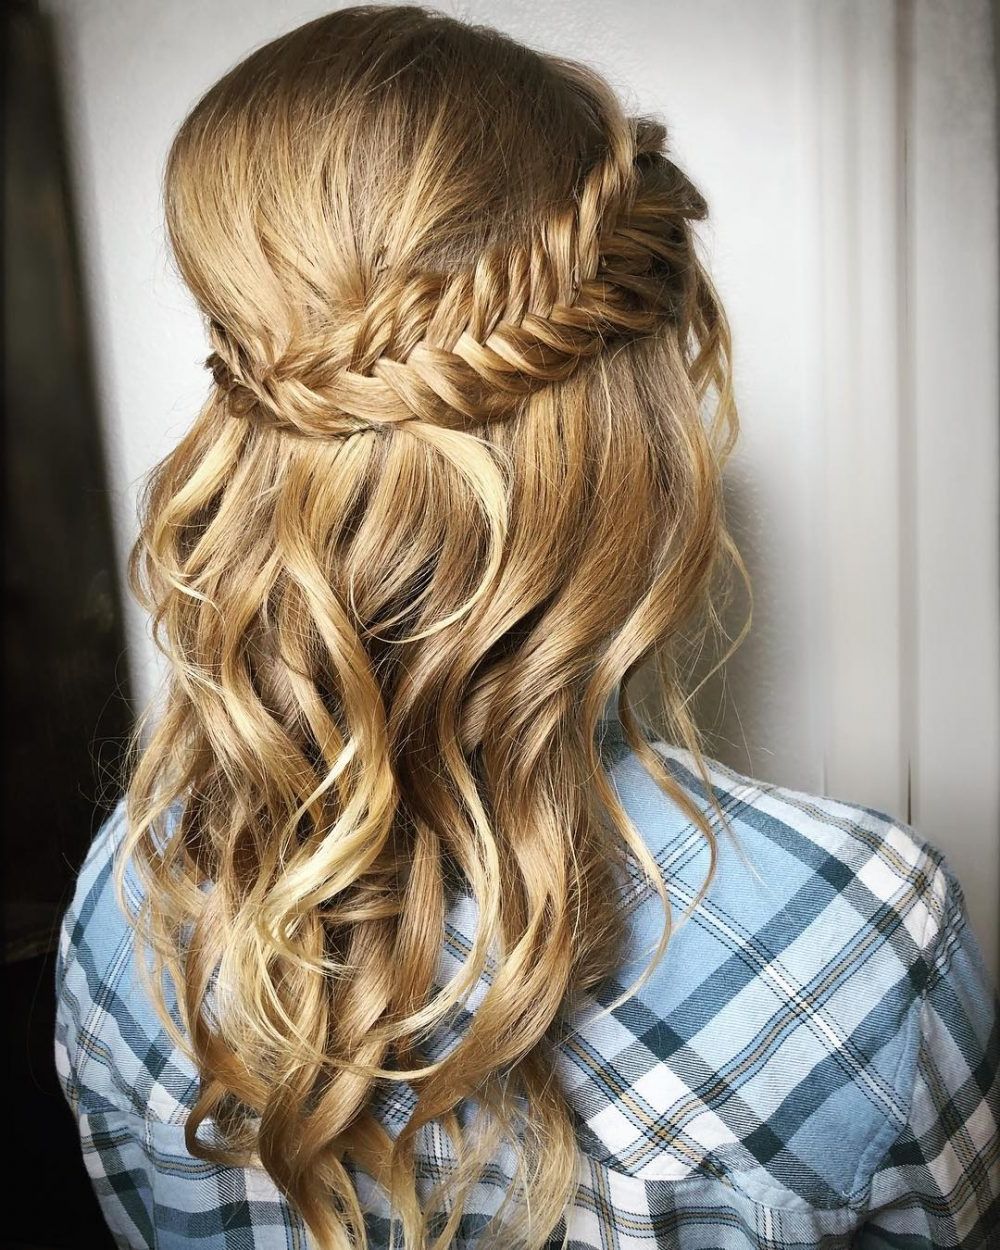 27 Prettiest Half Up Half Down Prom Hairstyles For 2019 Pertaining To Favorite Cute Formal Half Updo Hairstyles For Thick Medium Hair (View 1 of 20)